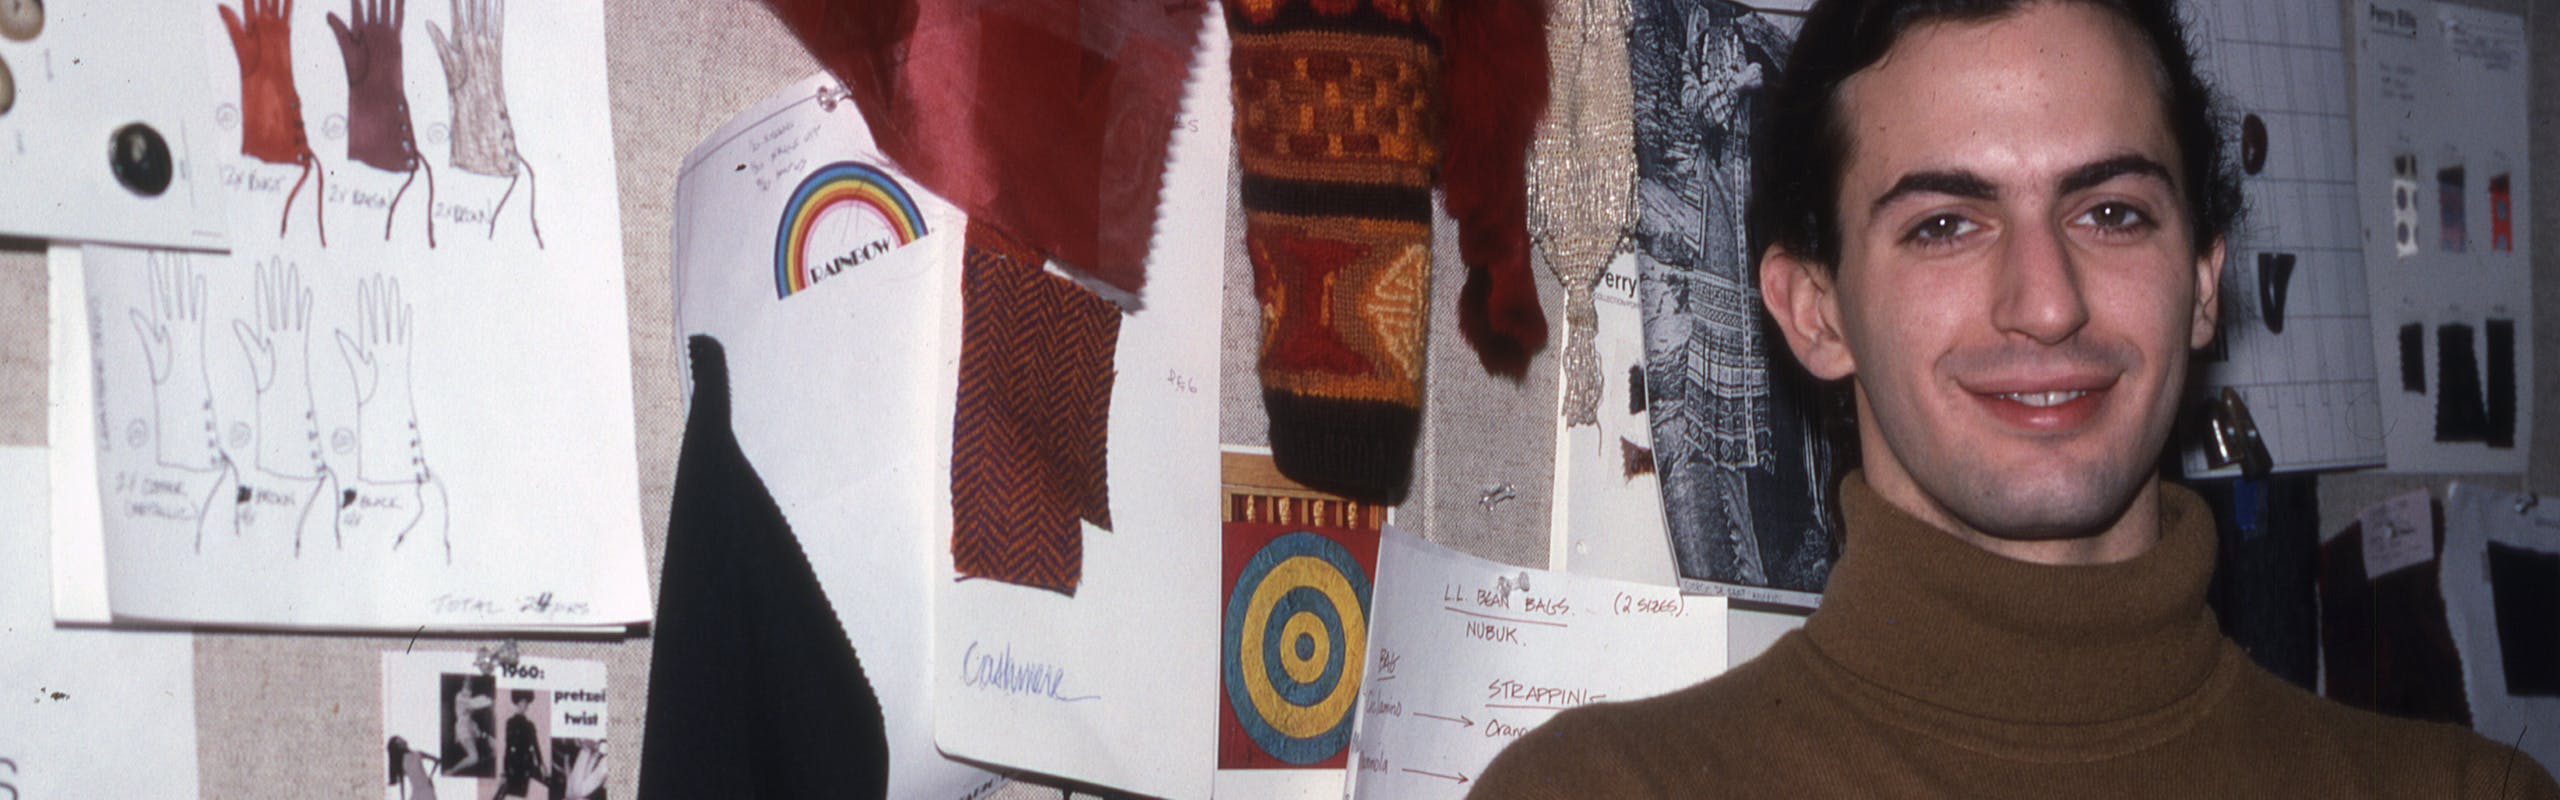 Marc Jacobs circa 1989 in his design studio. Photo courtesy of Getty Images.